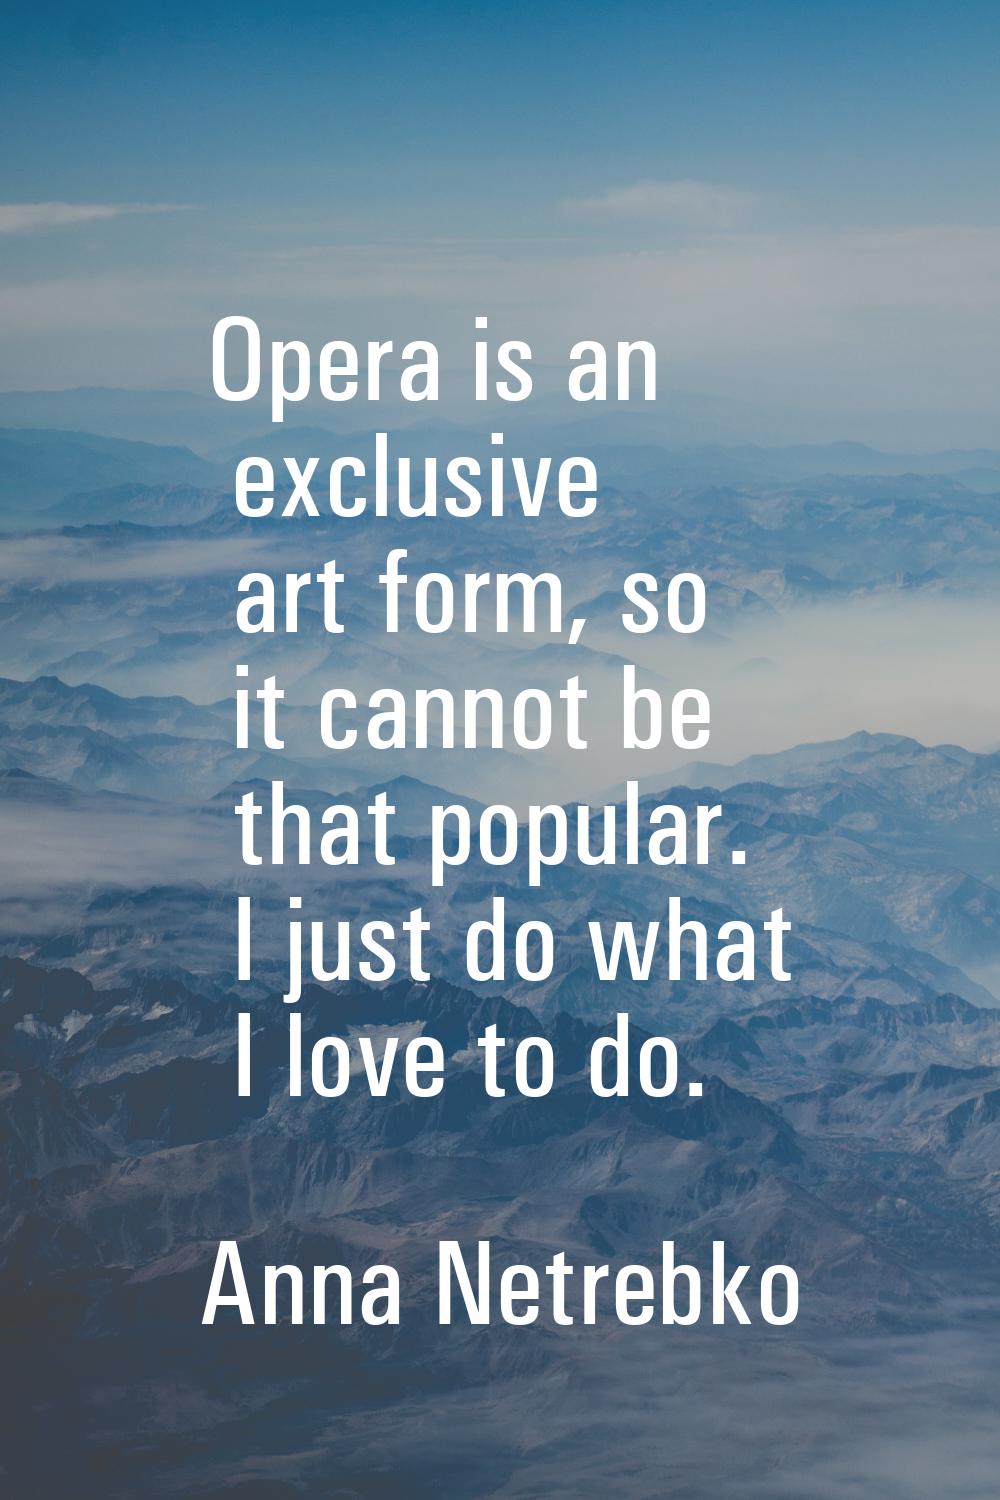 Opera is an exclusive art form, so it cannot be that popular. I just do what I love to do.